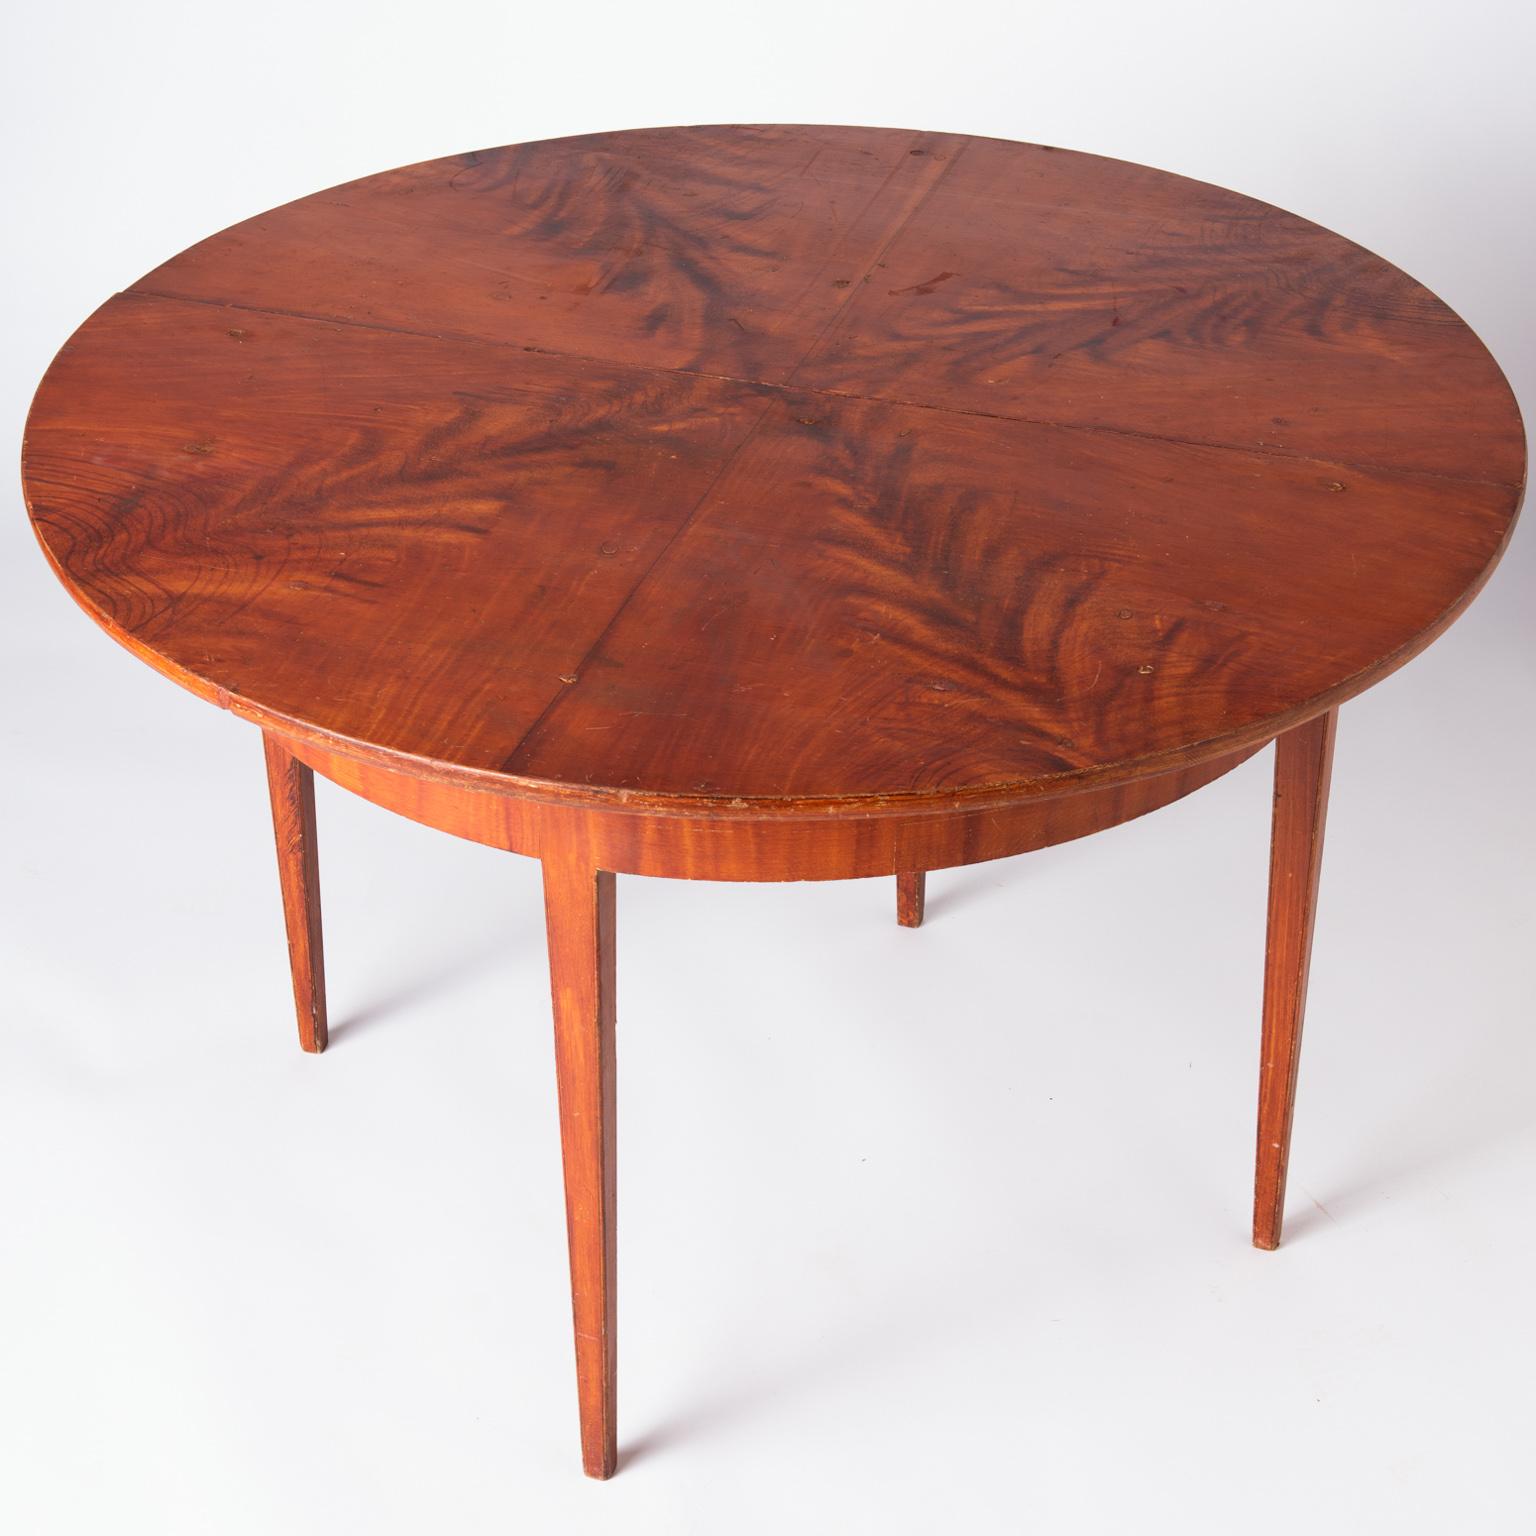 This spectacular table retains the original grain painting in a lovely pattern of feathery shapes emanating from the center. The condition of the paint is excellent with a few minor touch ups, but retains the original surface, showing the creativity